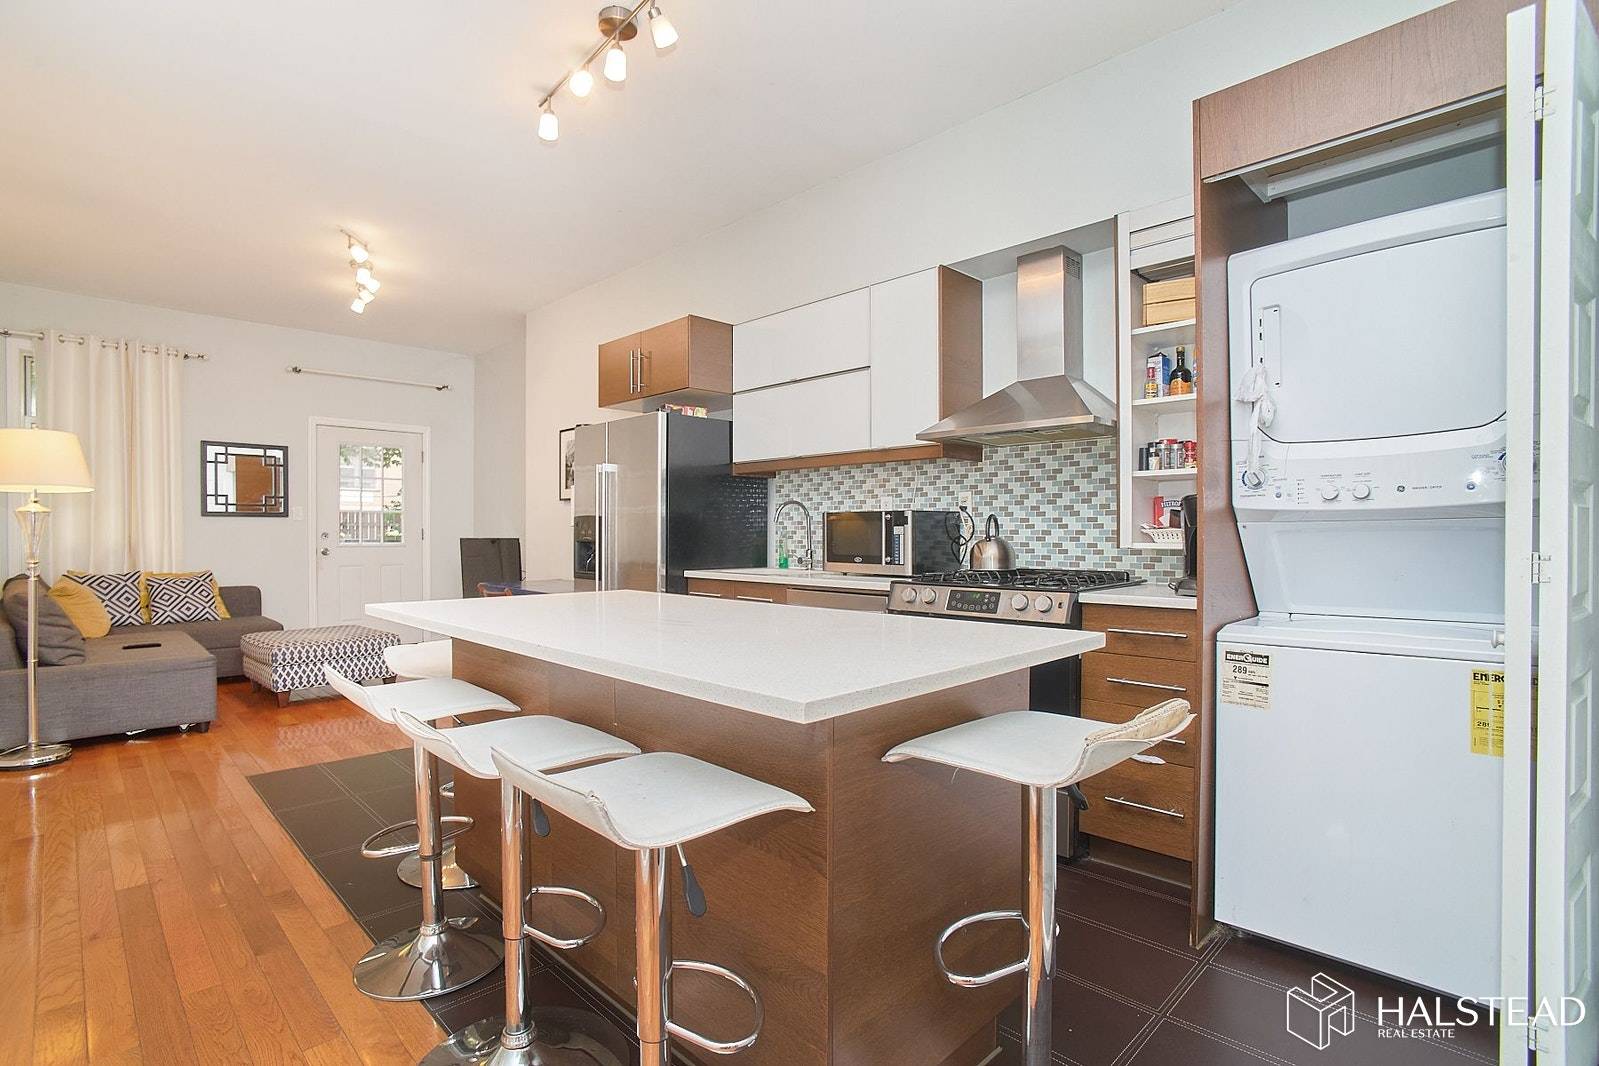 Stunning floor through 3 bedroom apartment in a beautiful Brownstone building located in the heart of Washington Heights.